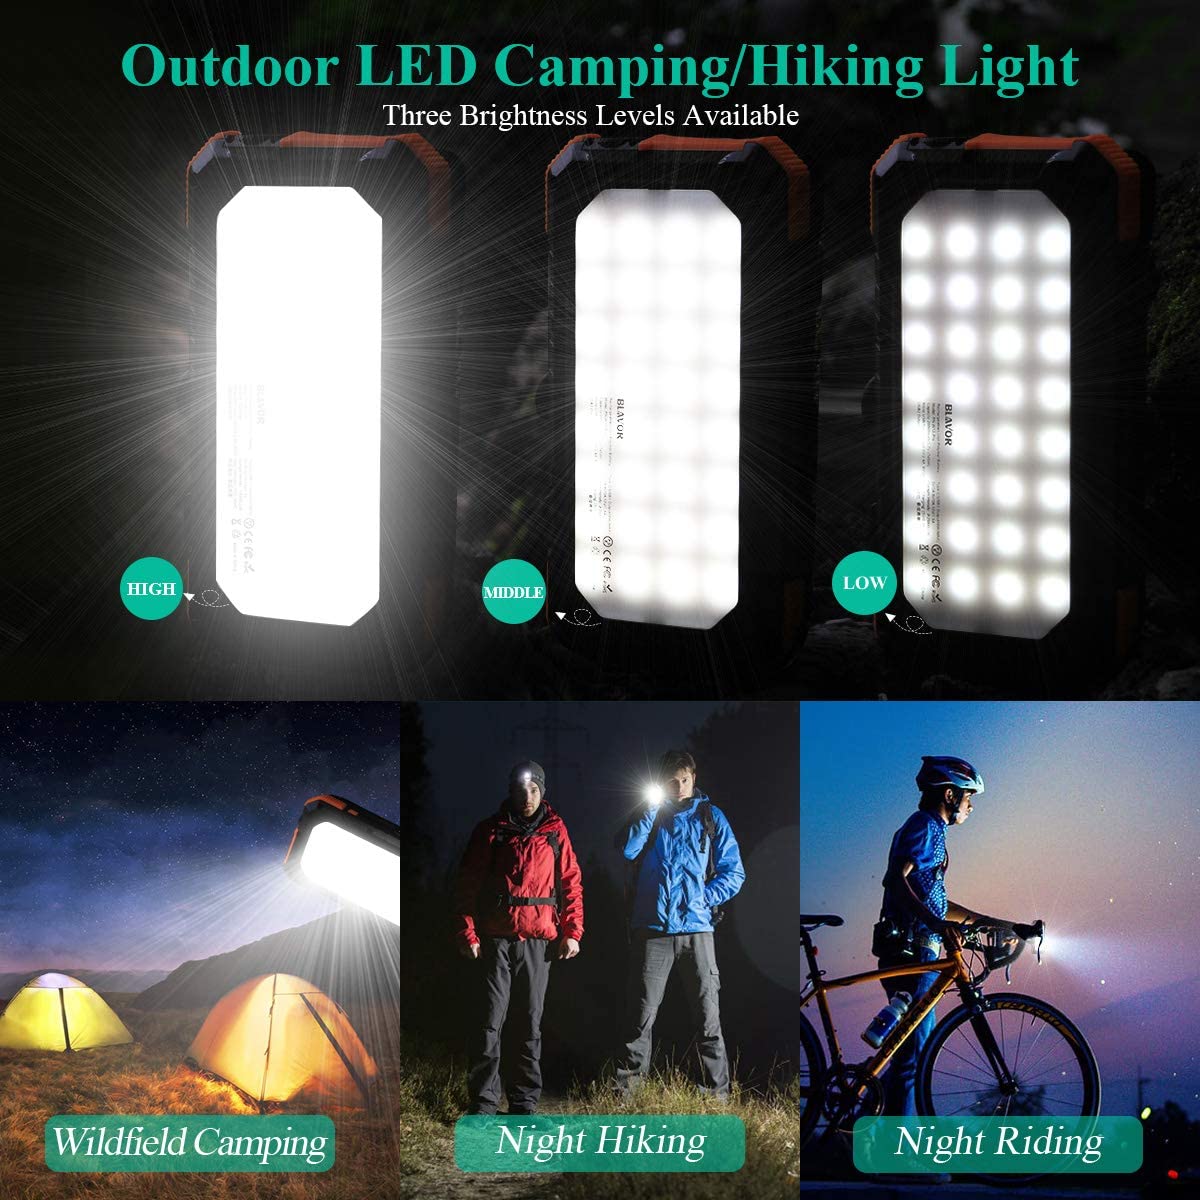 Portable Foldable Camp Tent Light Multifunction 3 in 1 Camping Lantern  Telescoping Flame Rechargeable LED Light Solar Powered LED Camping Light  with Hook - China Camping Light, Solar Light